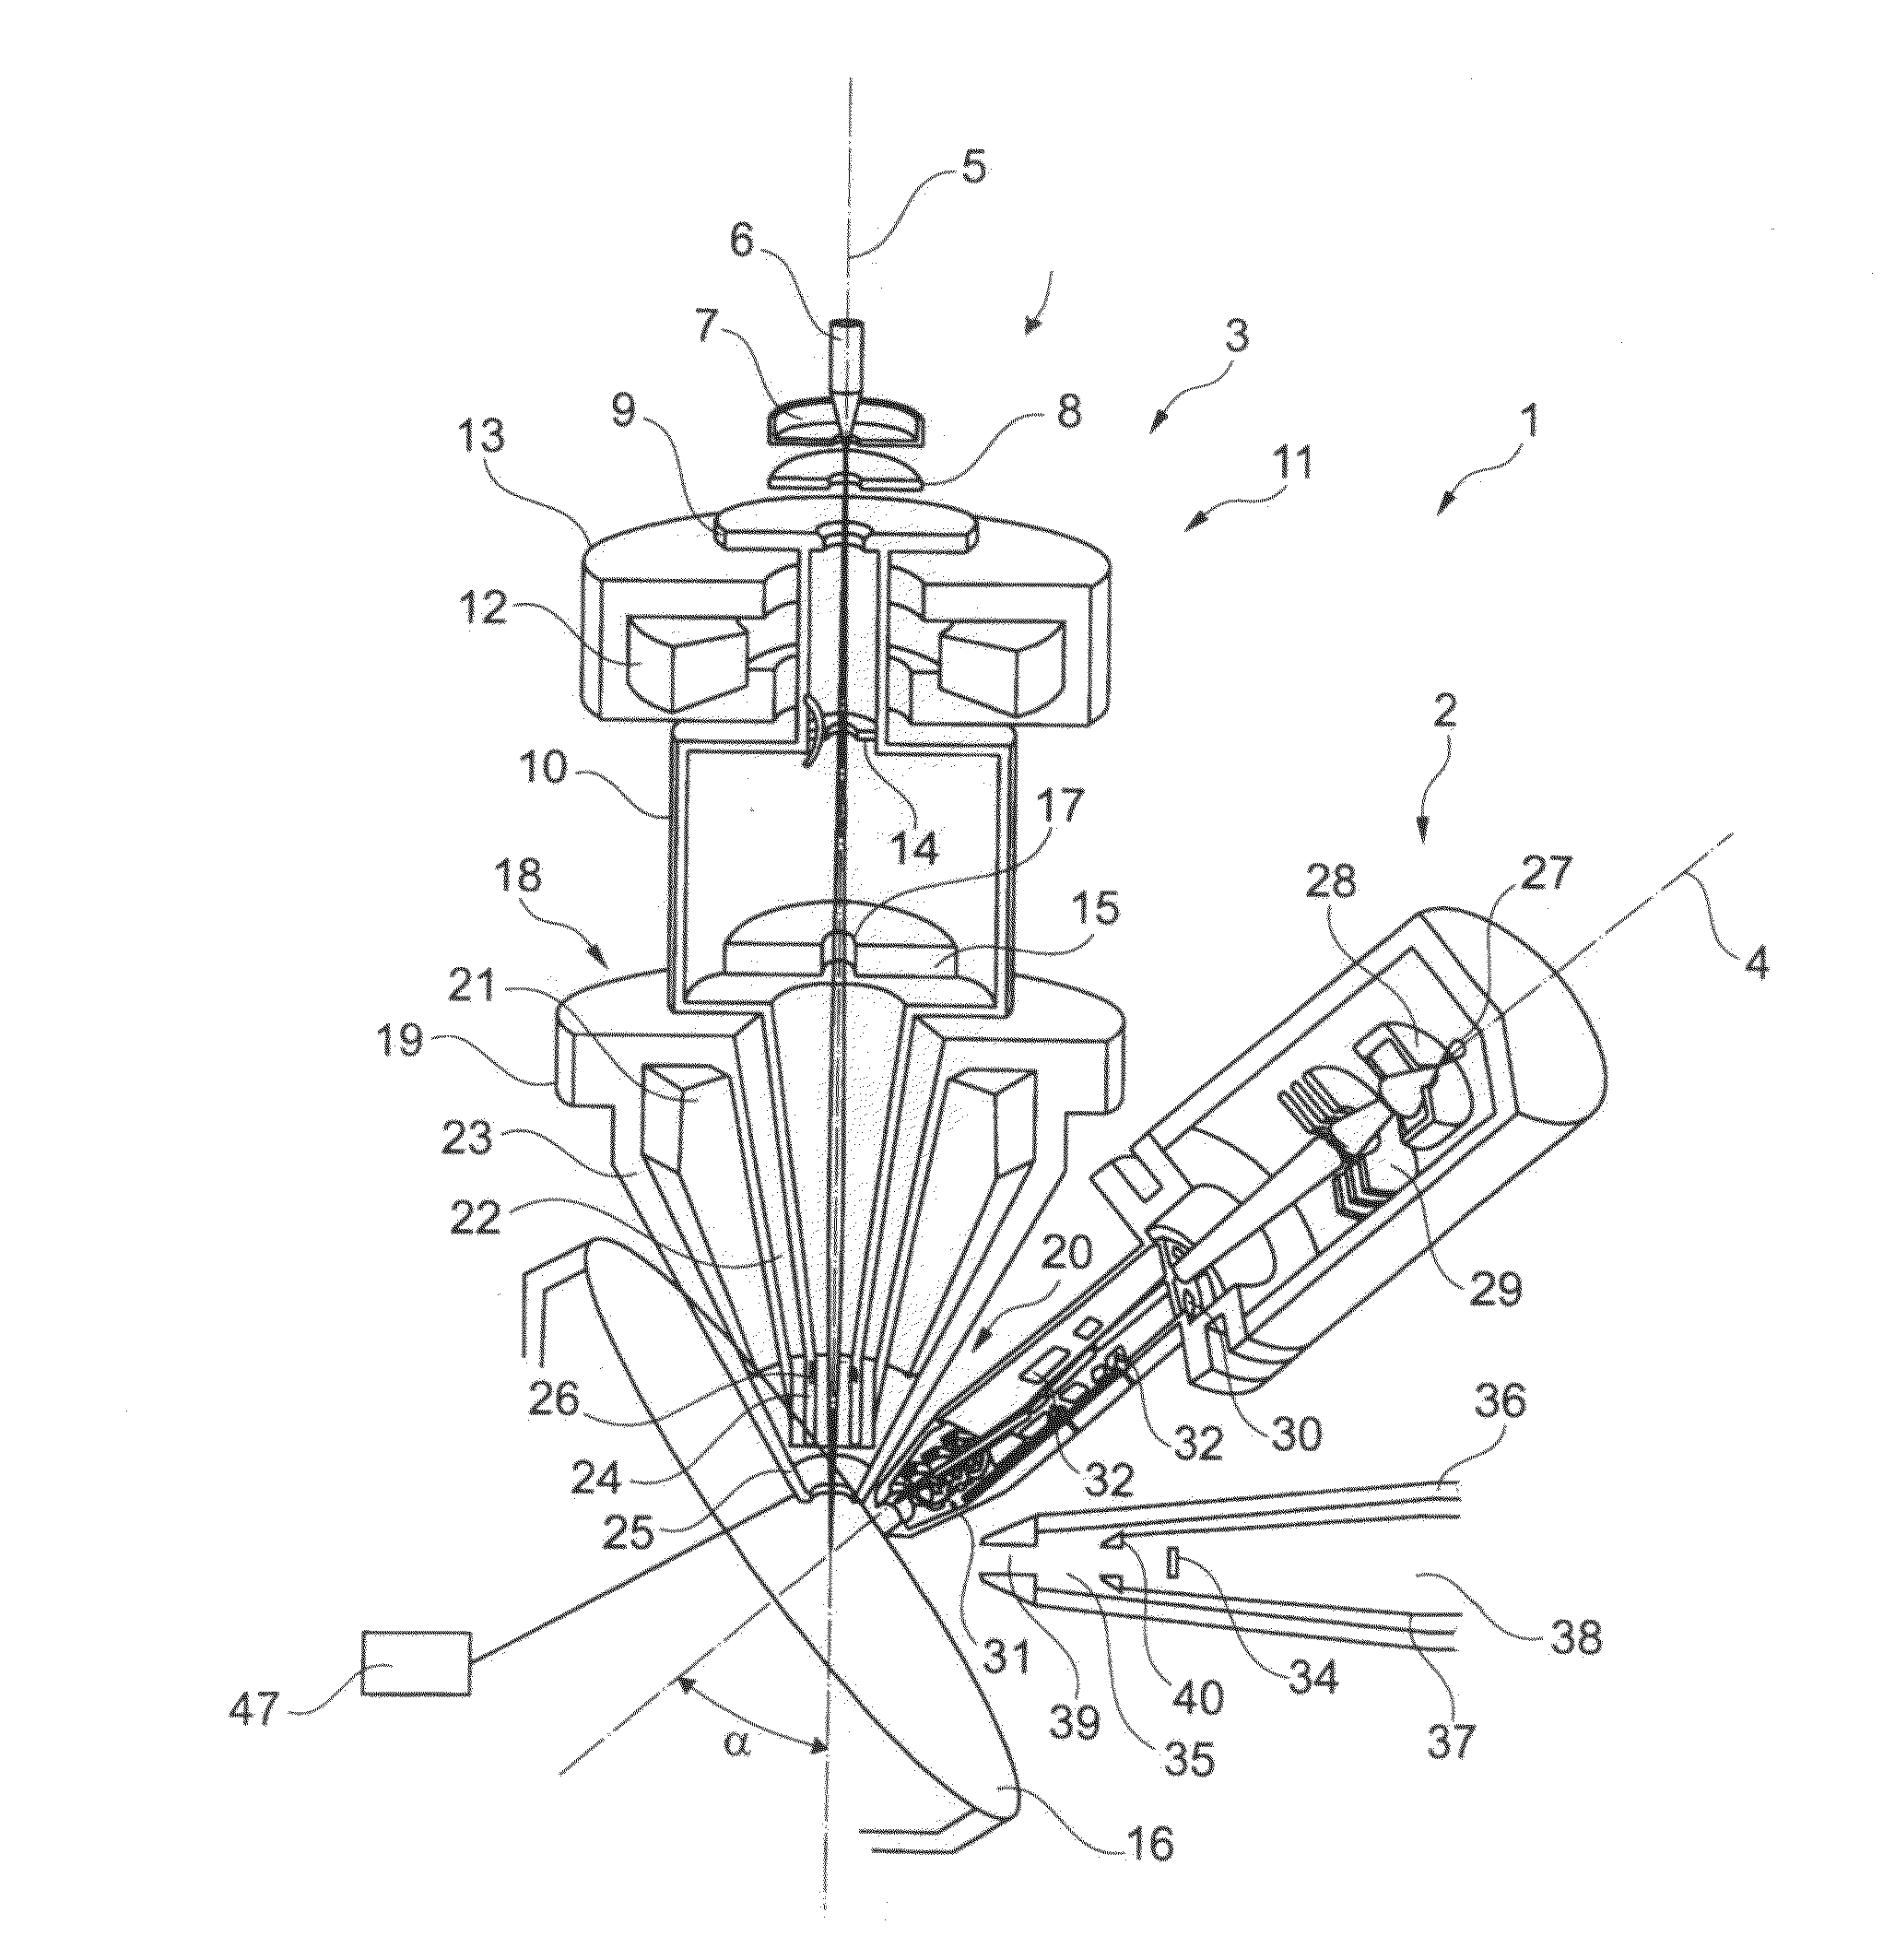 Particle beam device and method for operation of a particle beam device